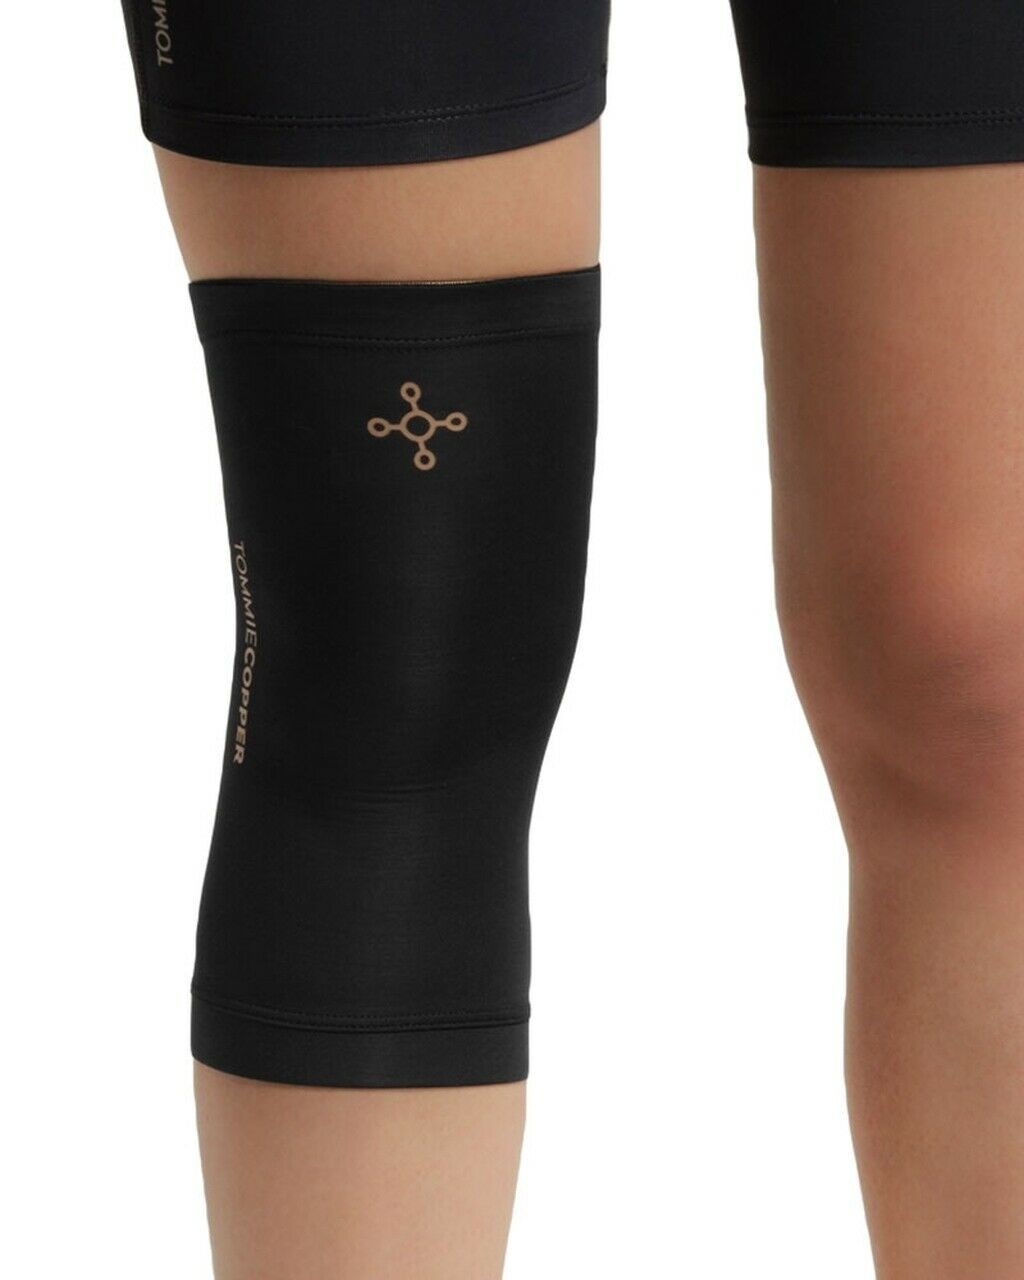 Tommie Copper Girls Core Knee Sleeve, Size Small, Black - New